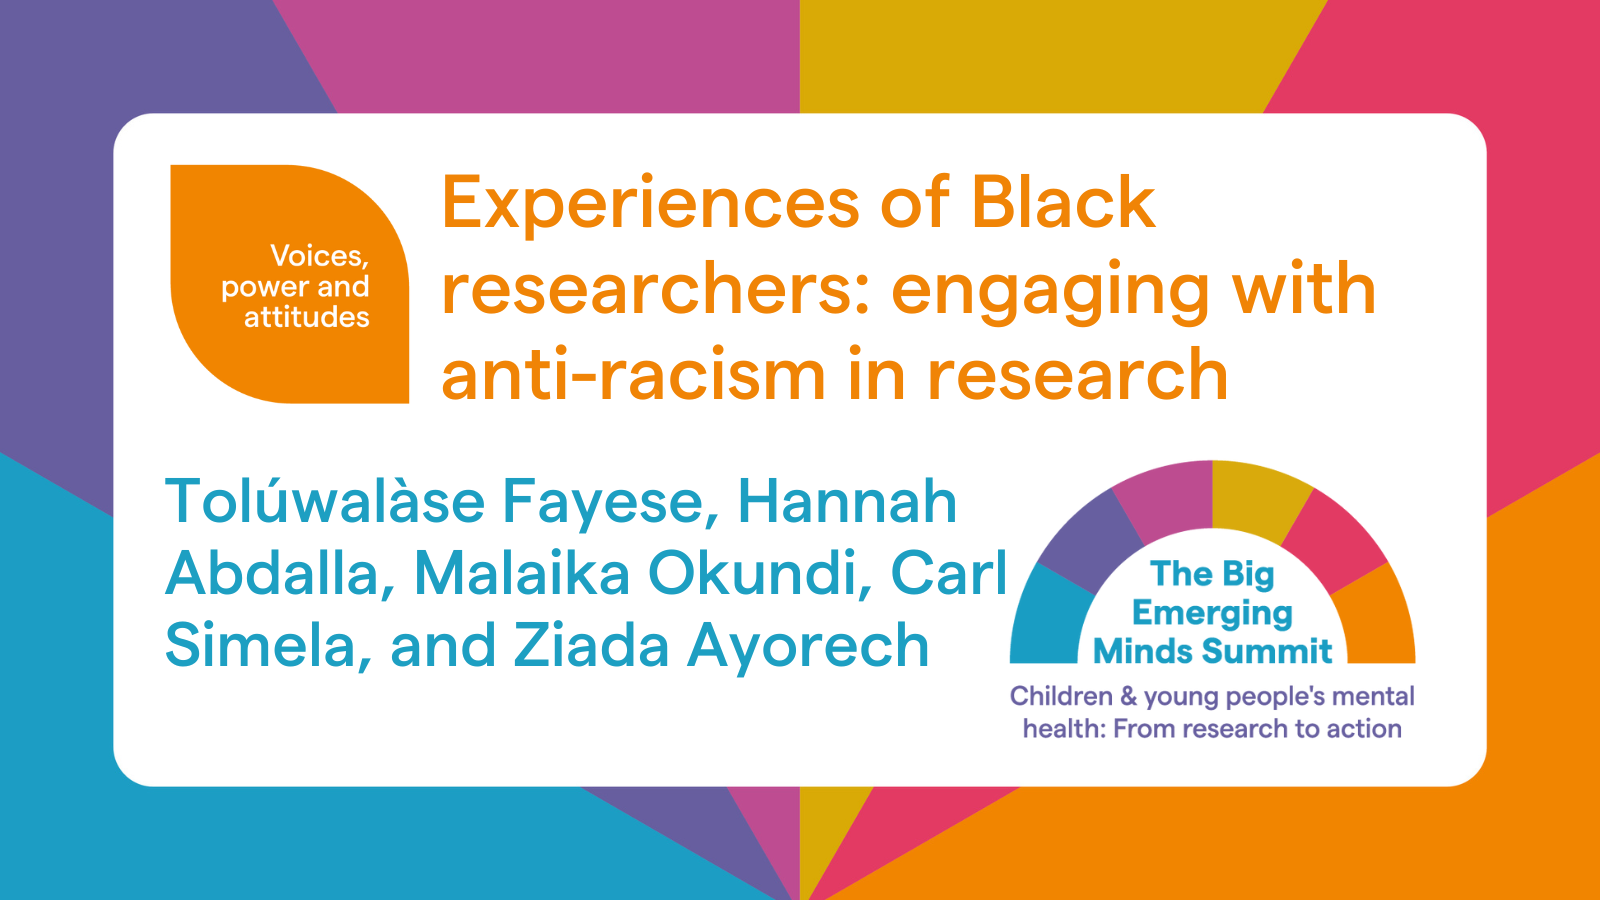 Experiences of Black researchers: engaging with anti-racism in research